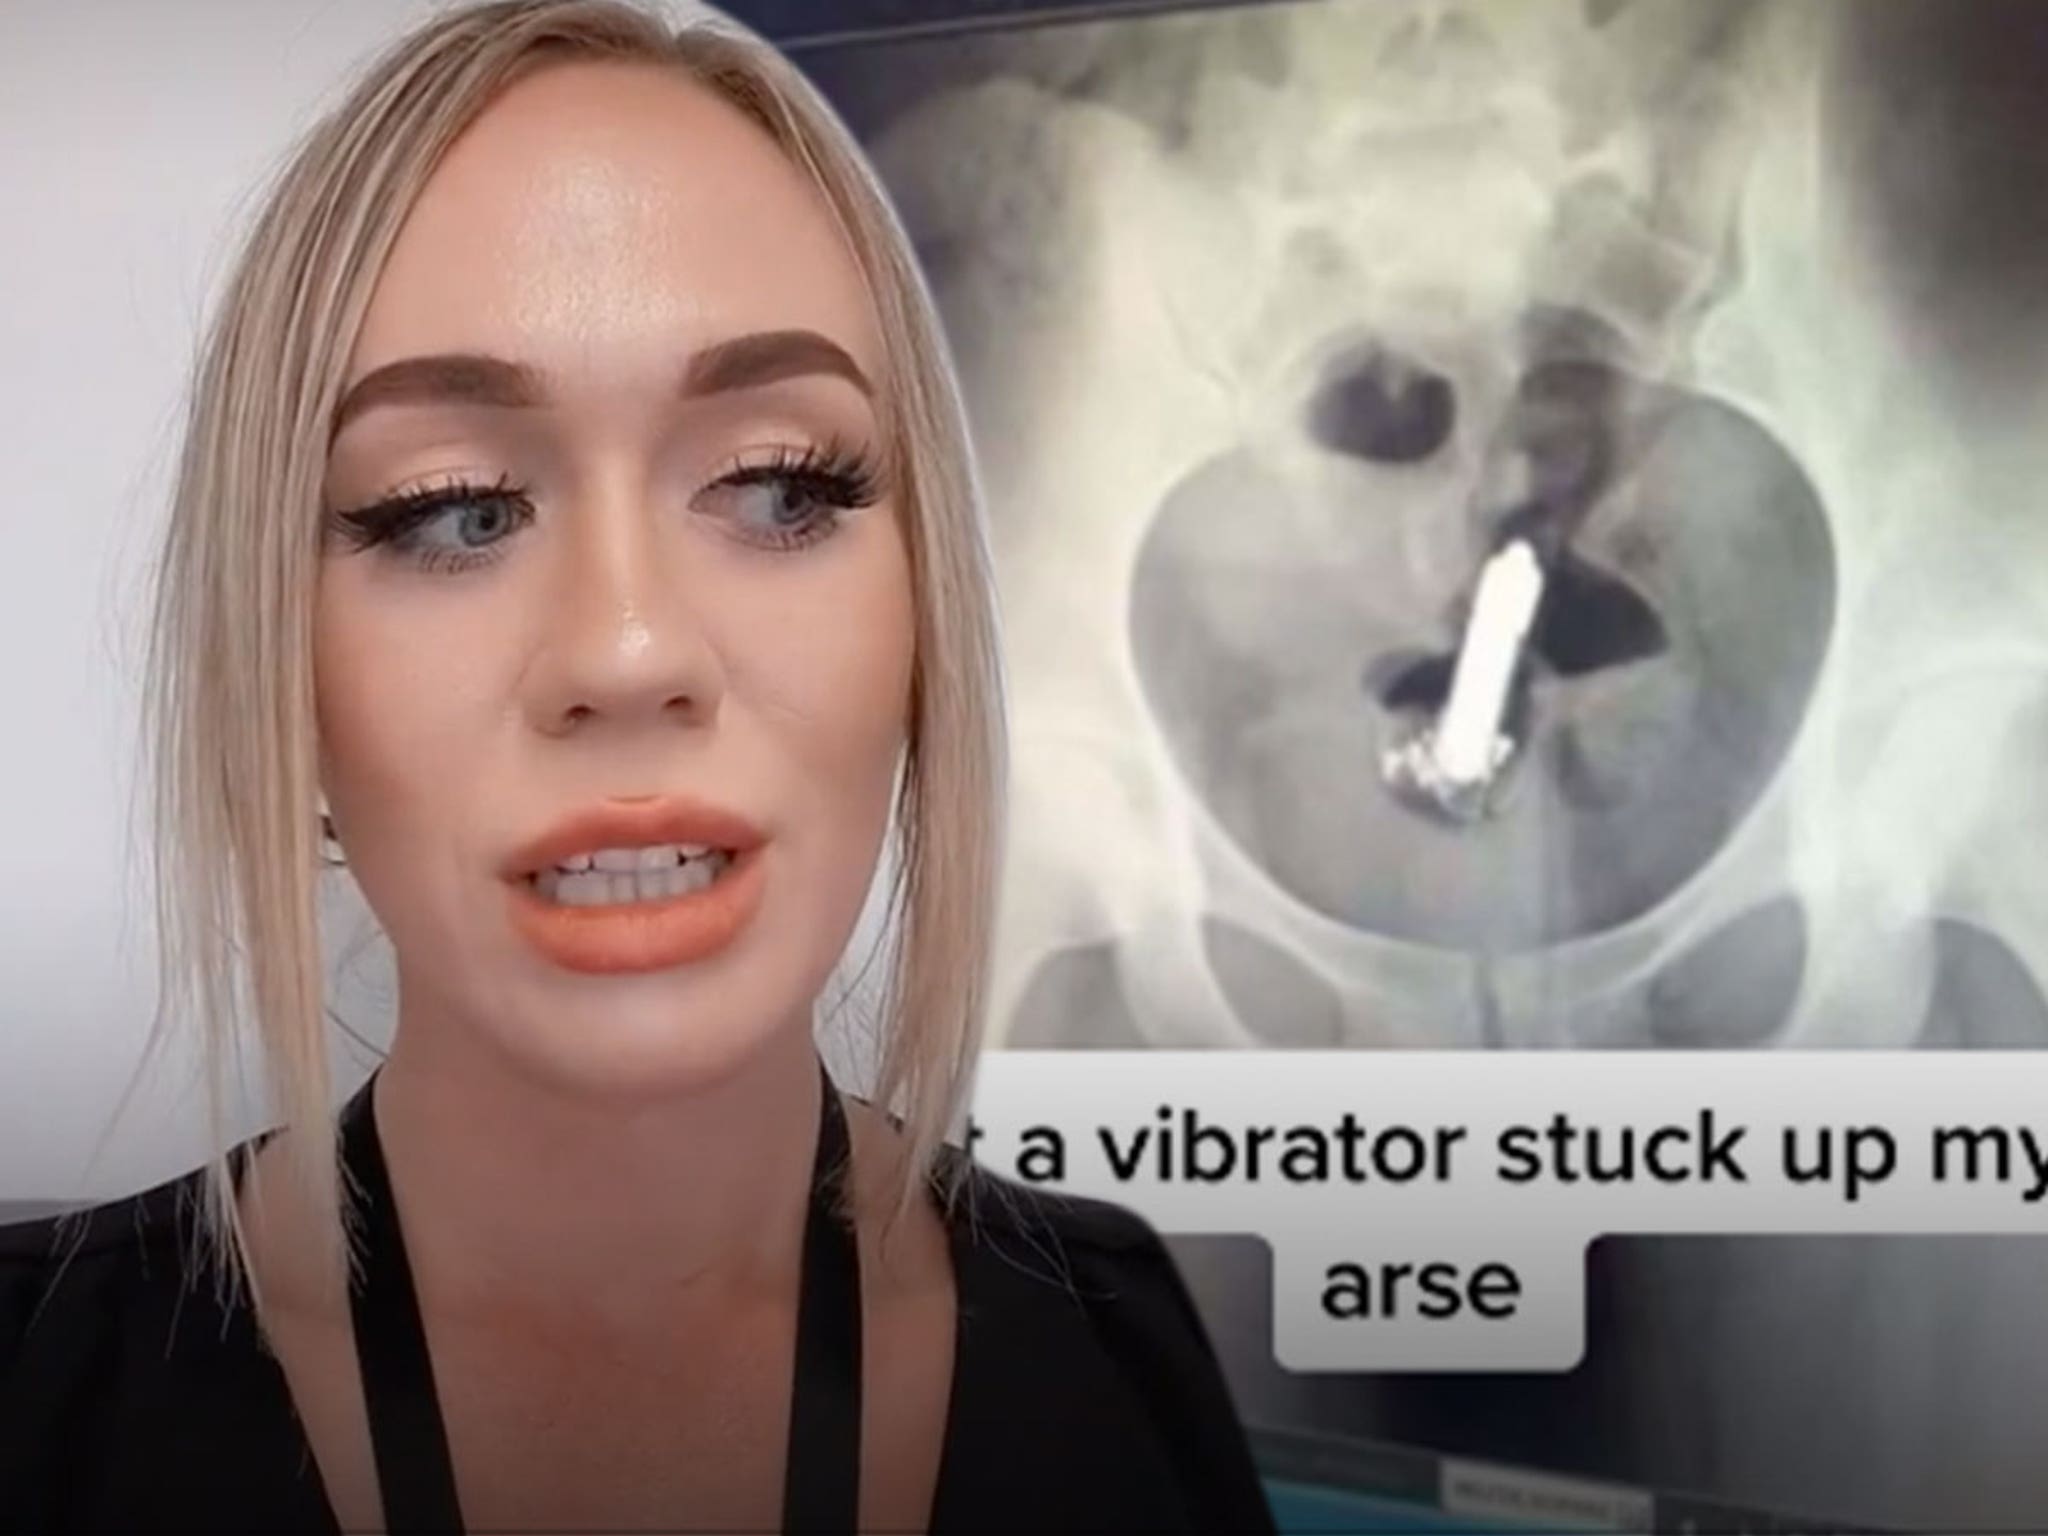 TikTok Star Says She Needed Surgery After Losing Vibrator in Butt image